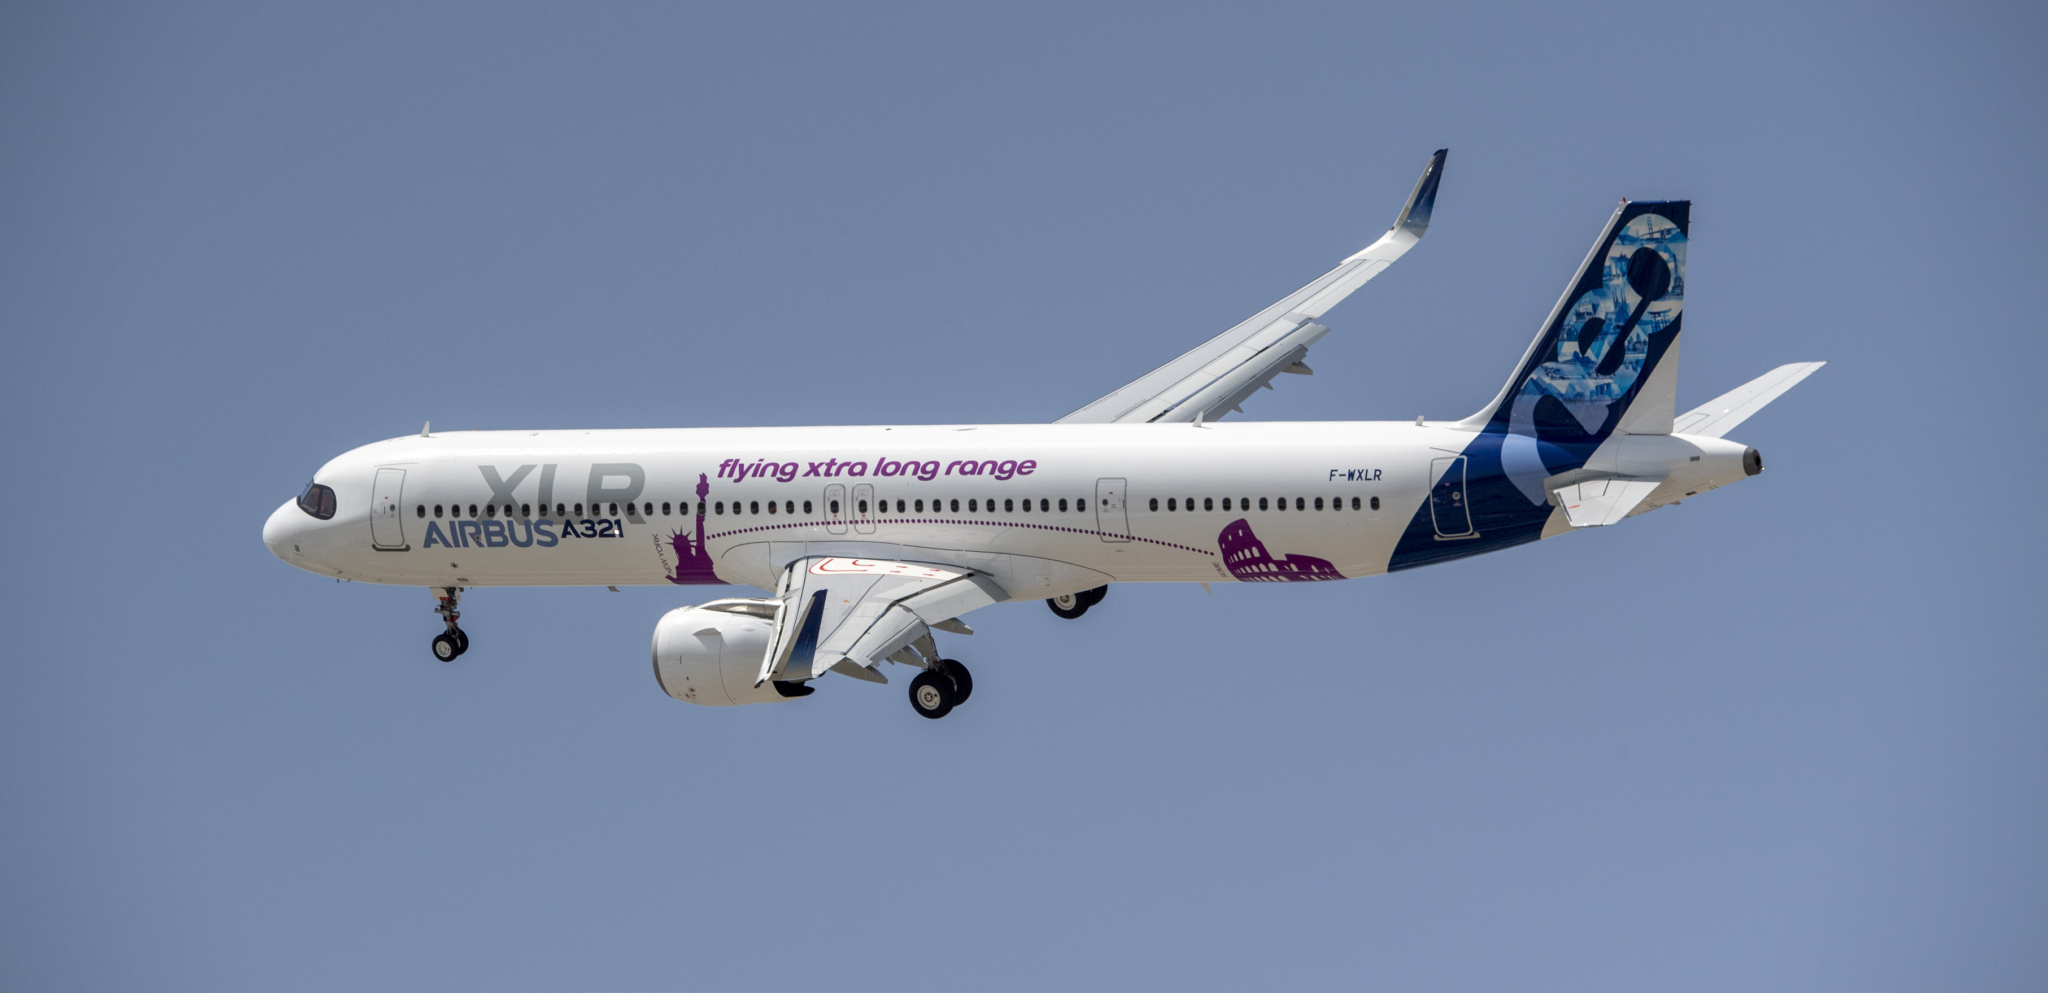 Airbus approves Goodyear aviation tyres for the new A321XLR